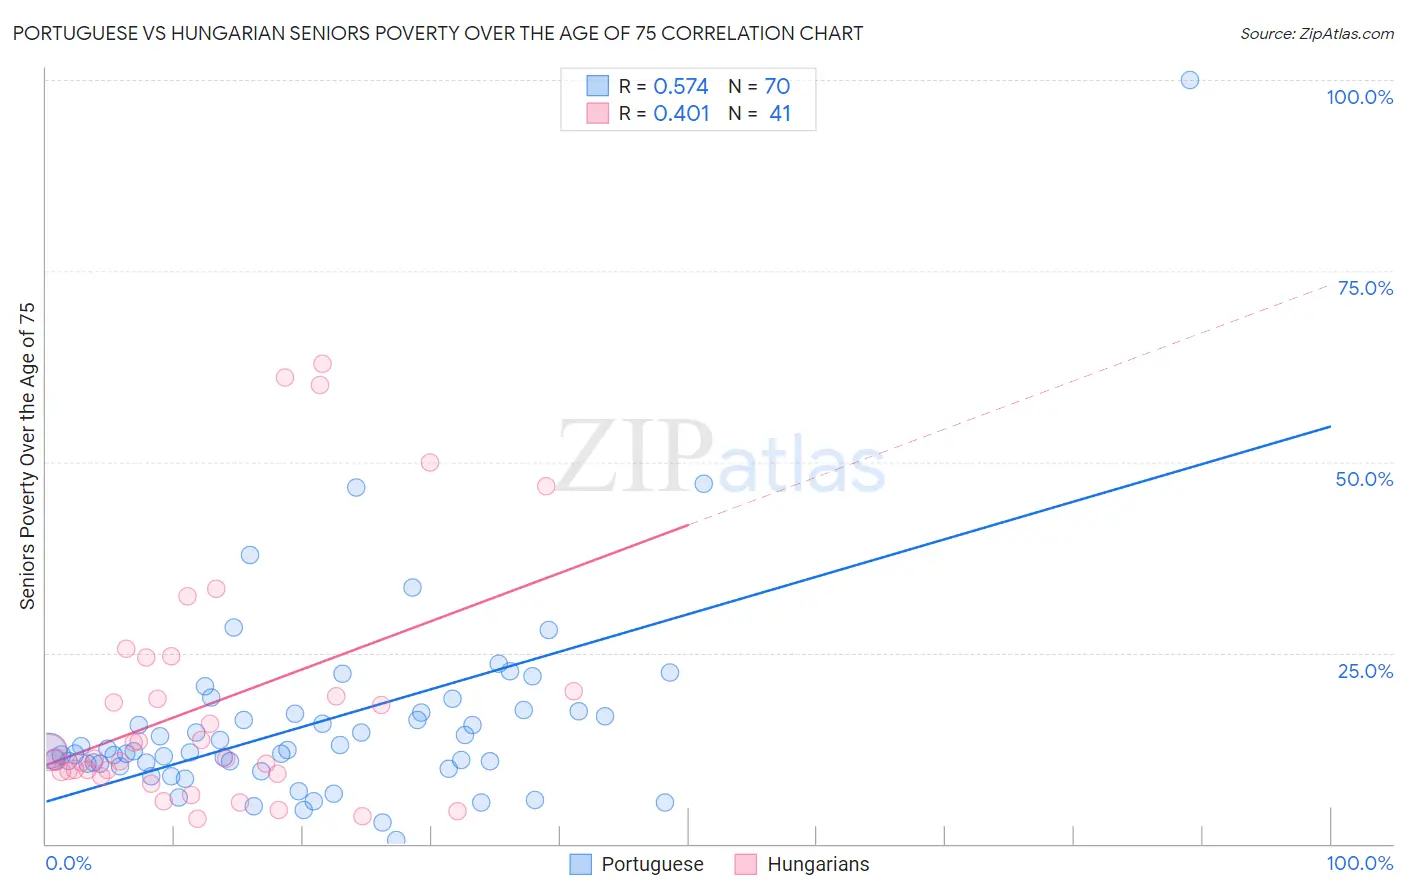 Portuguese vs Hungarian Seniors Poverty Over the Age of 75